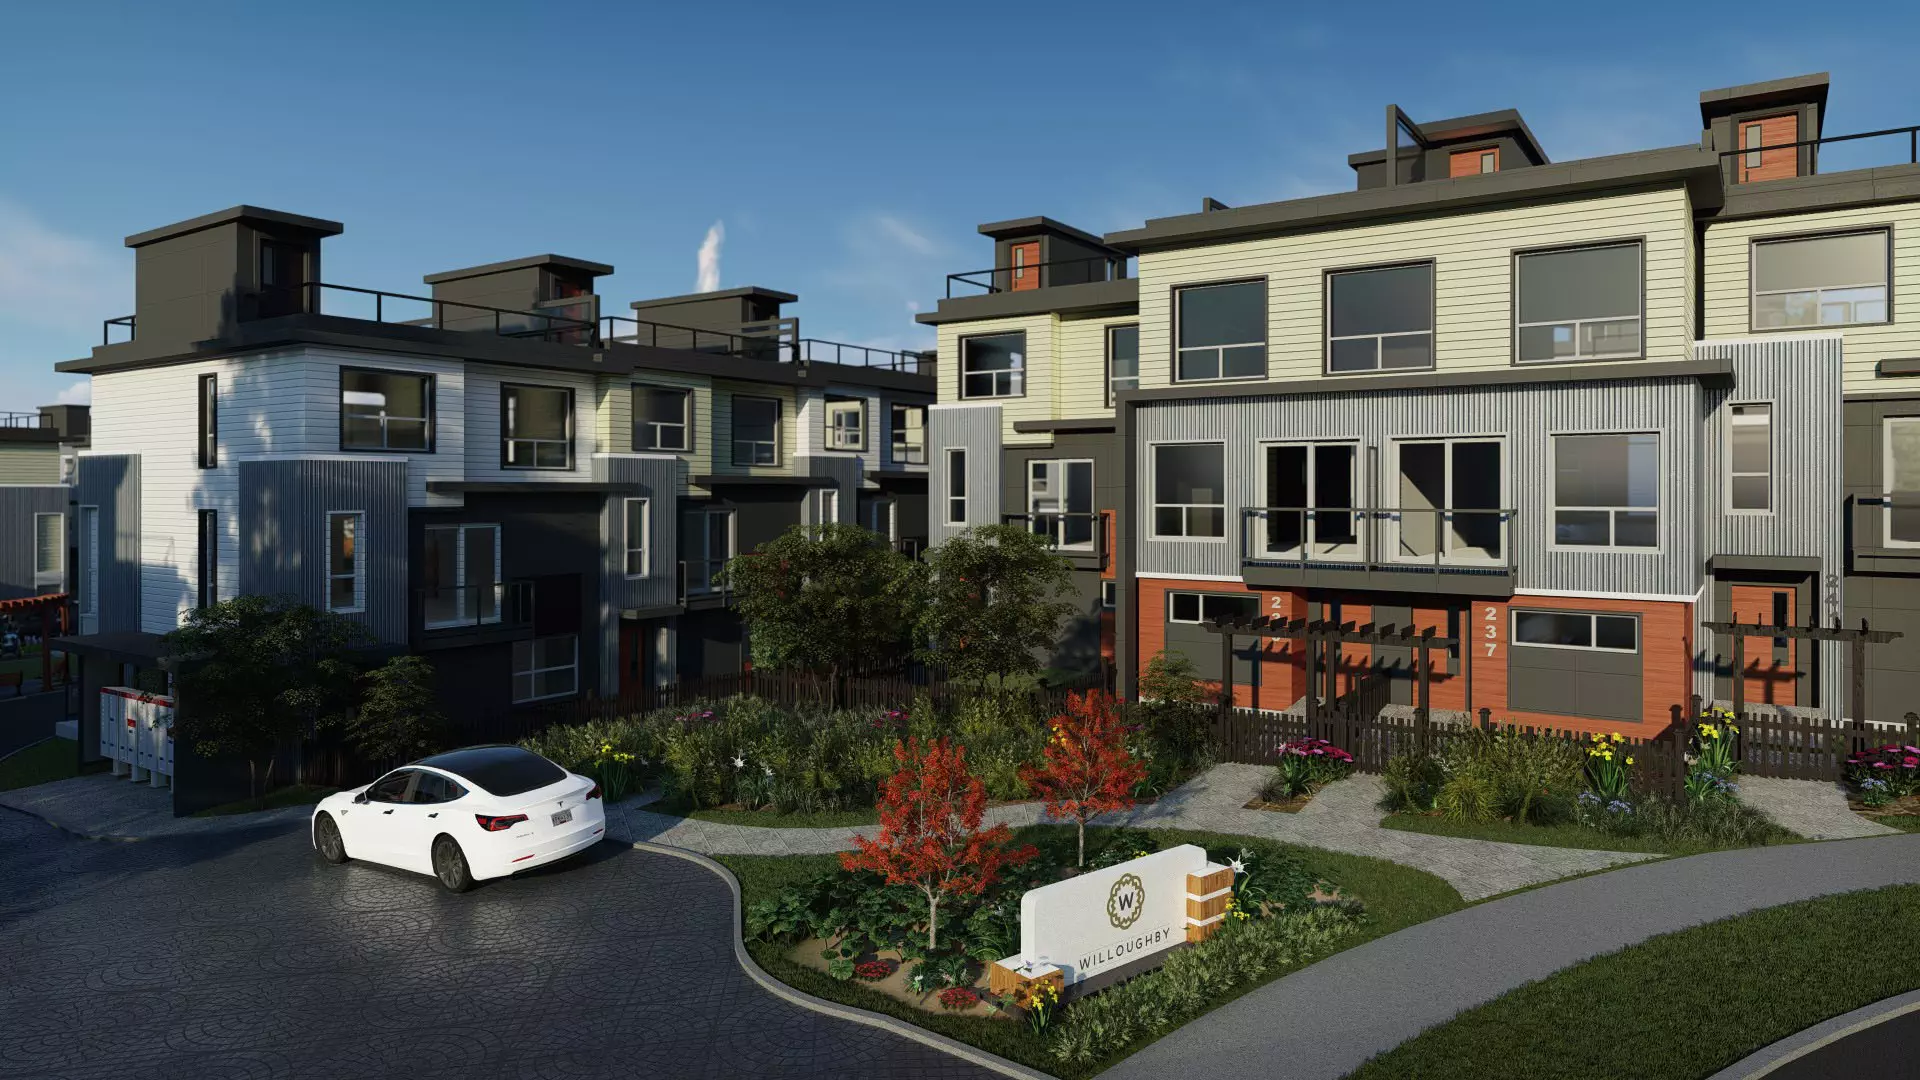 Langley Townhouse Project in Receivership, Owes Nearly $40 Million